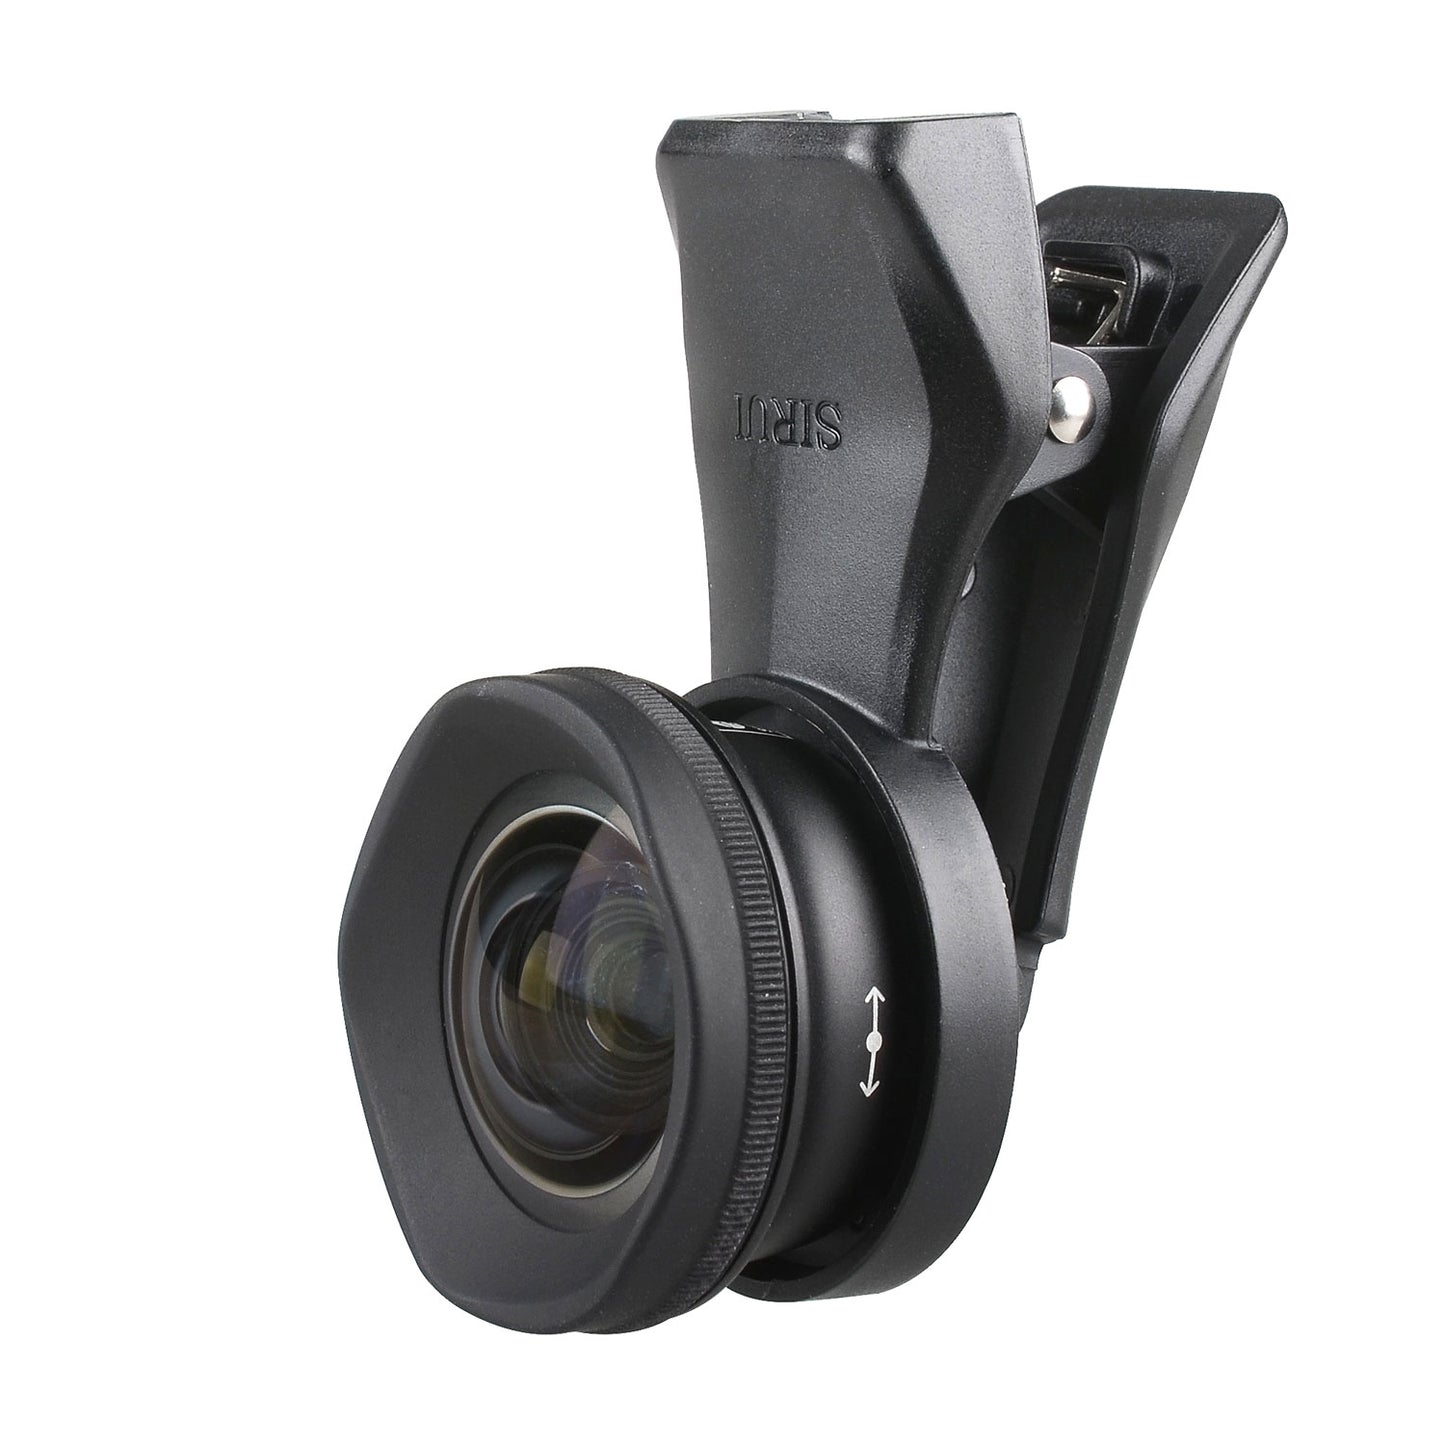 SIRUI 18-WA2 Smartphone wide angle lens 18mm with clip for Smartphone